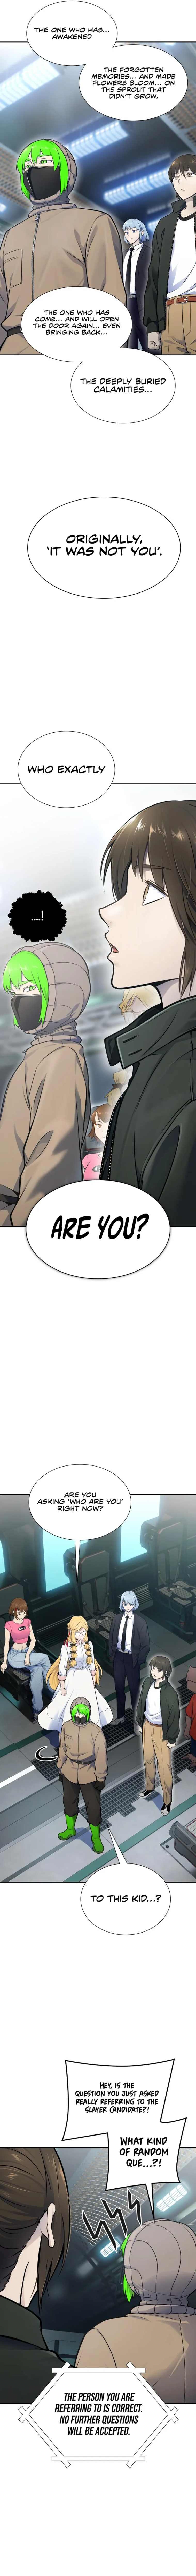 Tower of god chapter 597